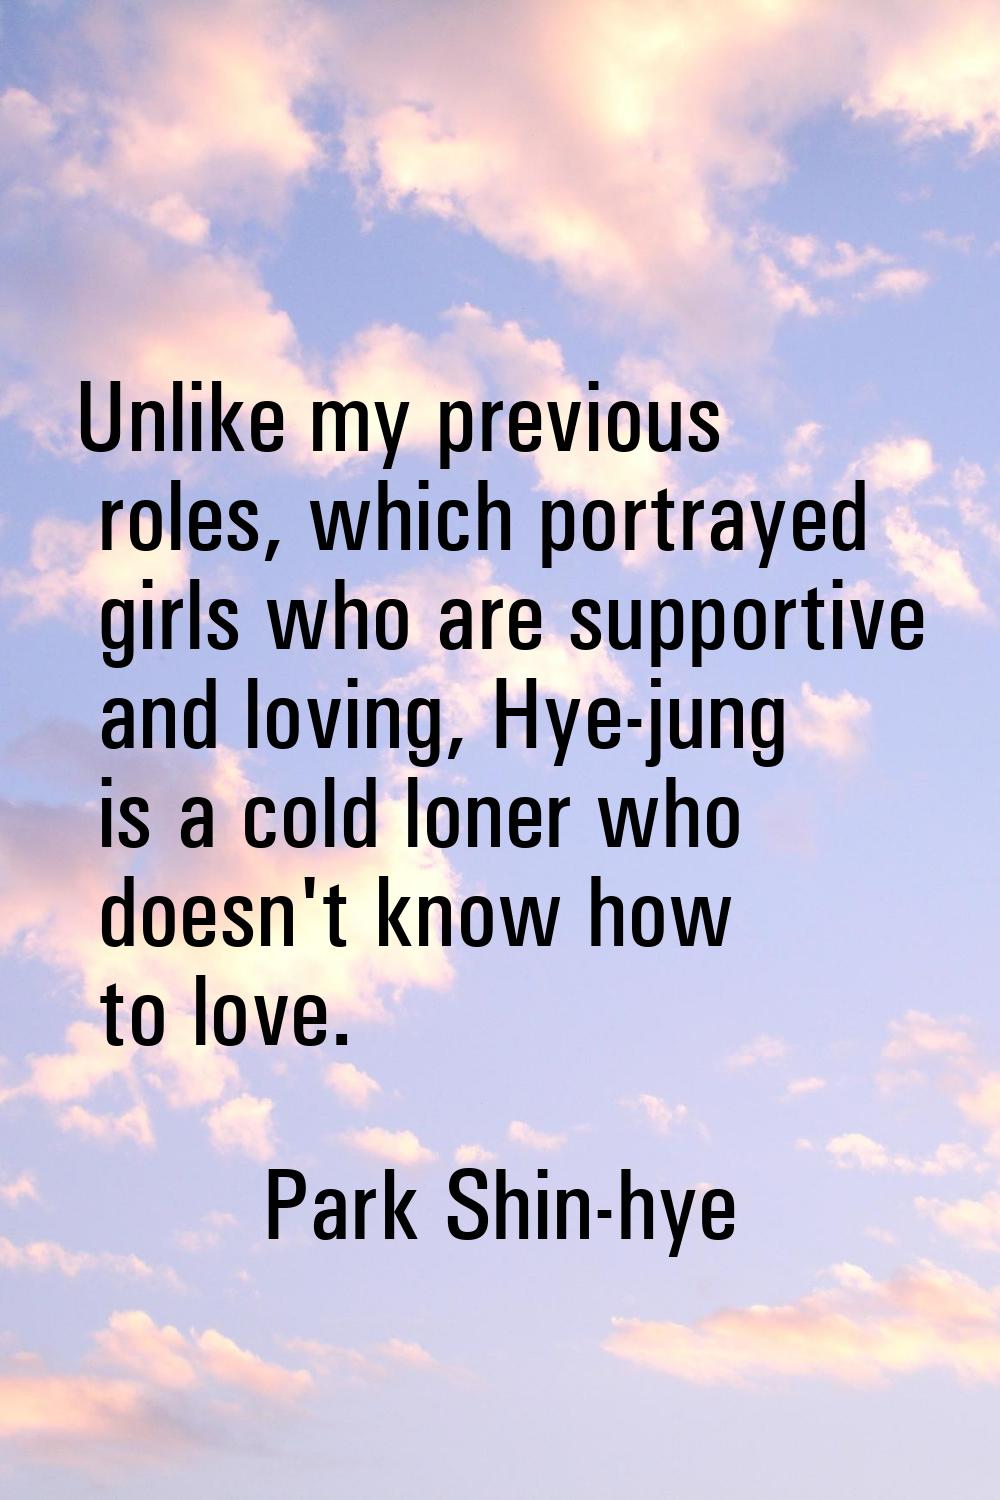 Unlike my previous roles, which portrayed girls who are supportive and loving, Hye-jung is a cold l